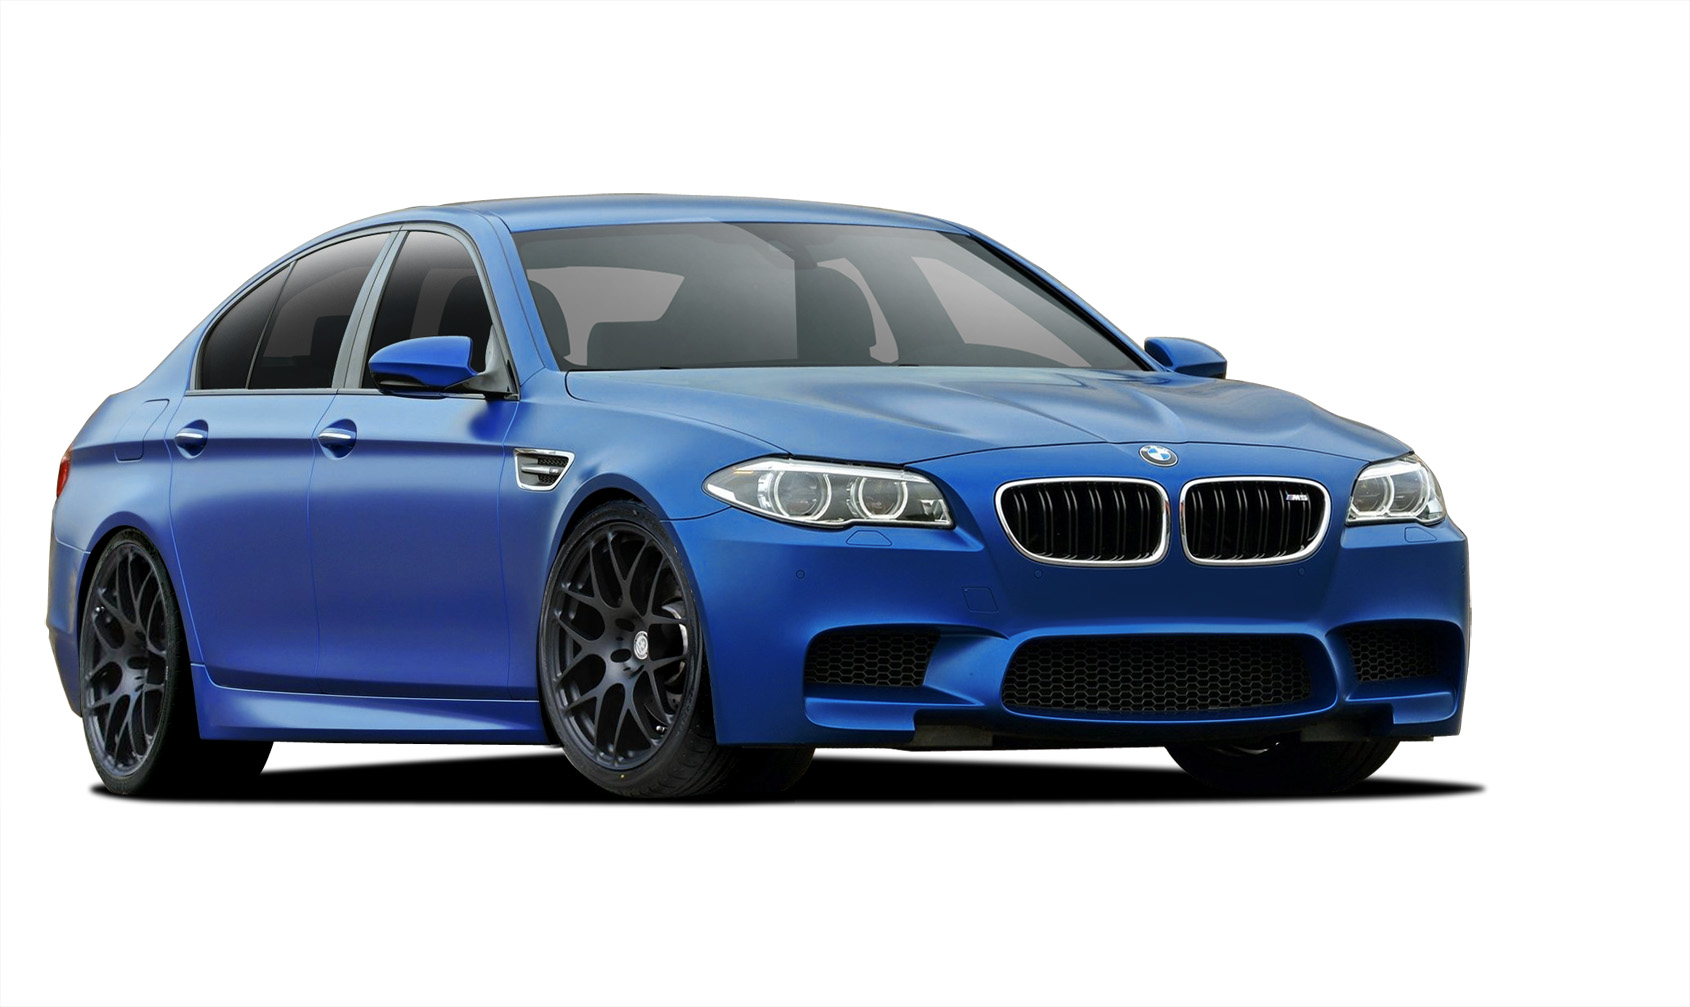 2016 BMW 5 Series 4DR Body Kit Bodykit - BMW 5 Series F10 Vaero M5 Look Conversion Kit ( with PDC , with Washer , without Camera ) - 6 Piece